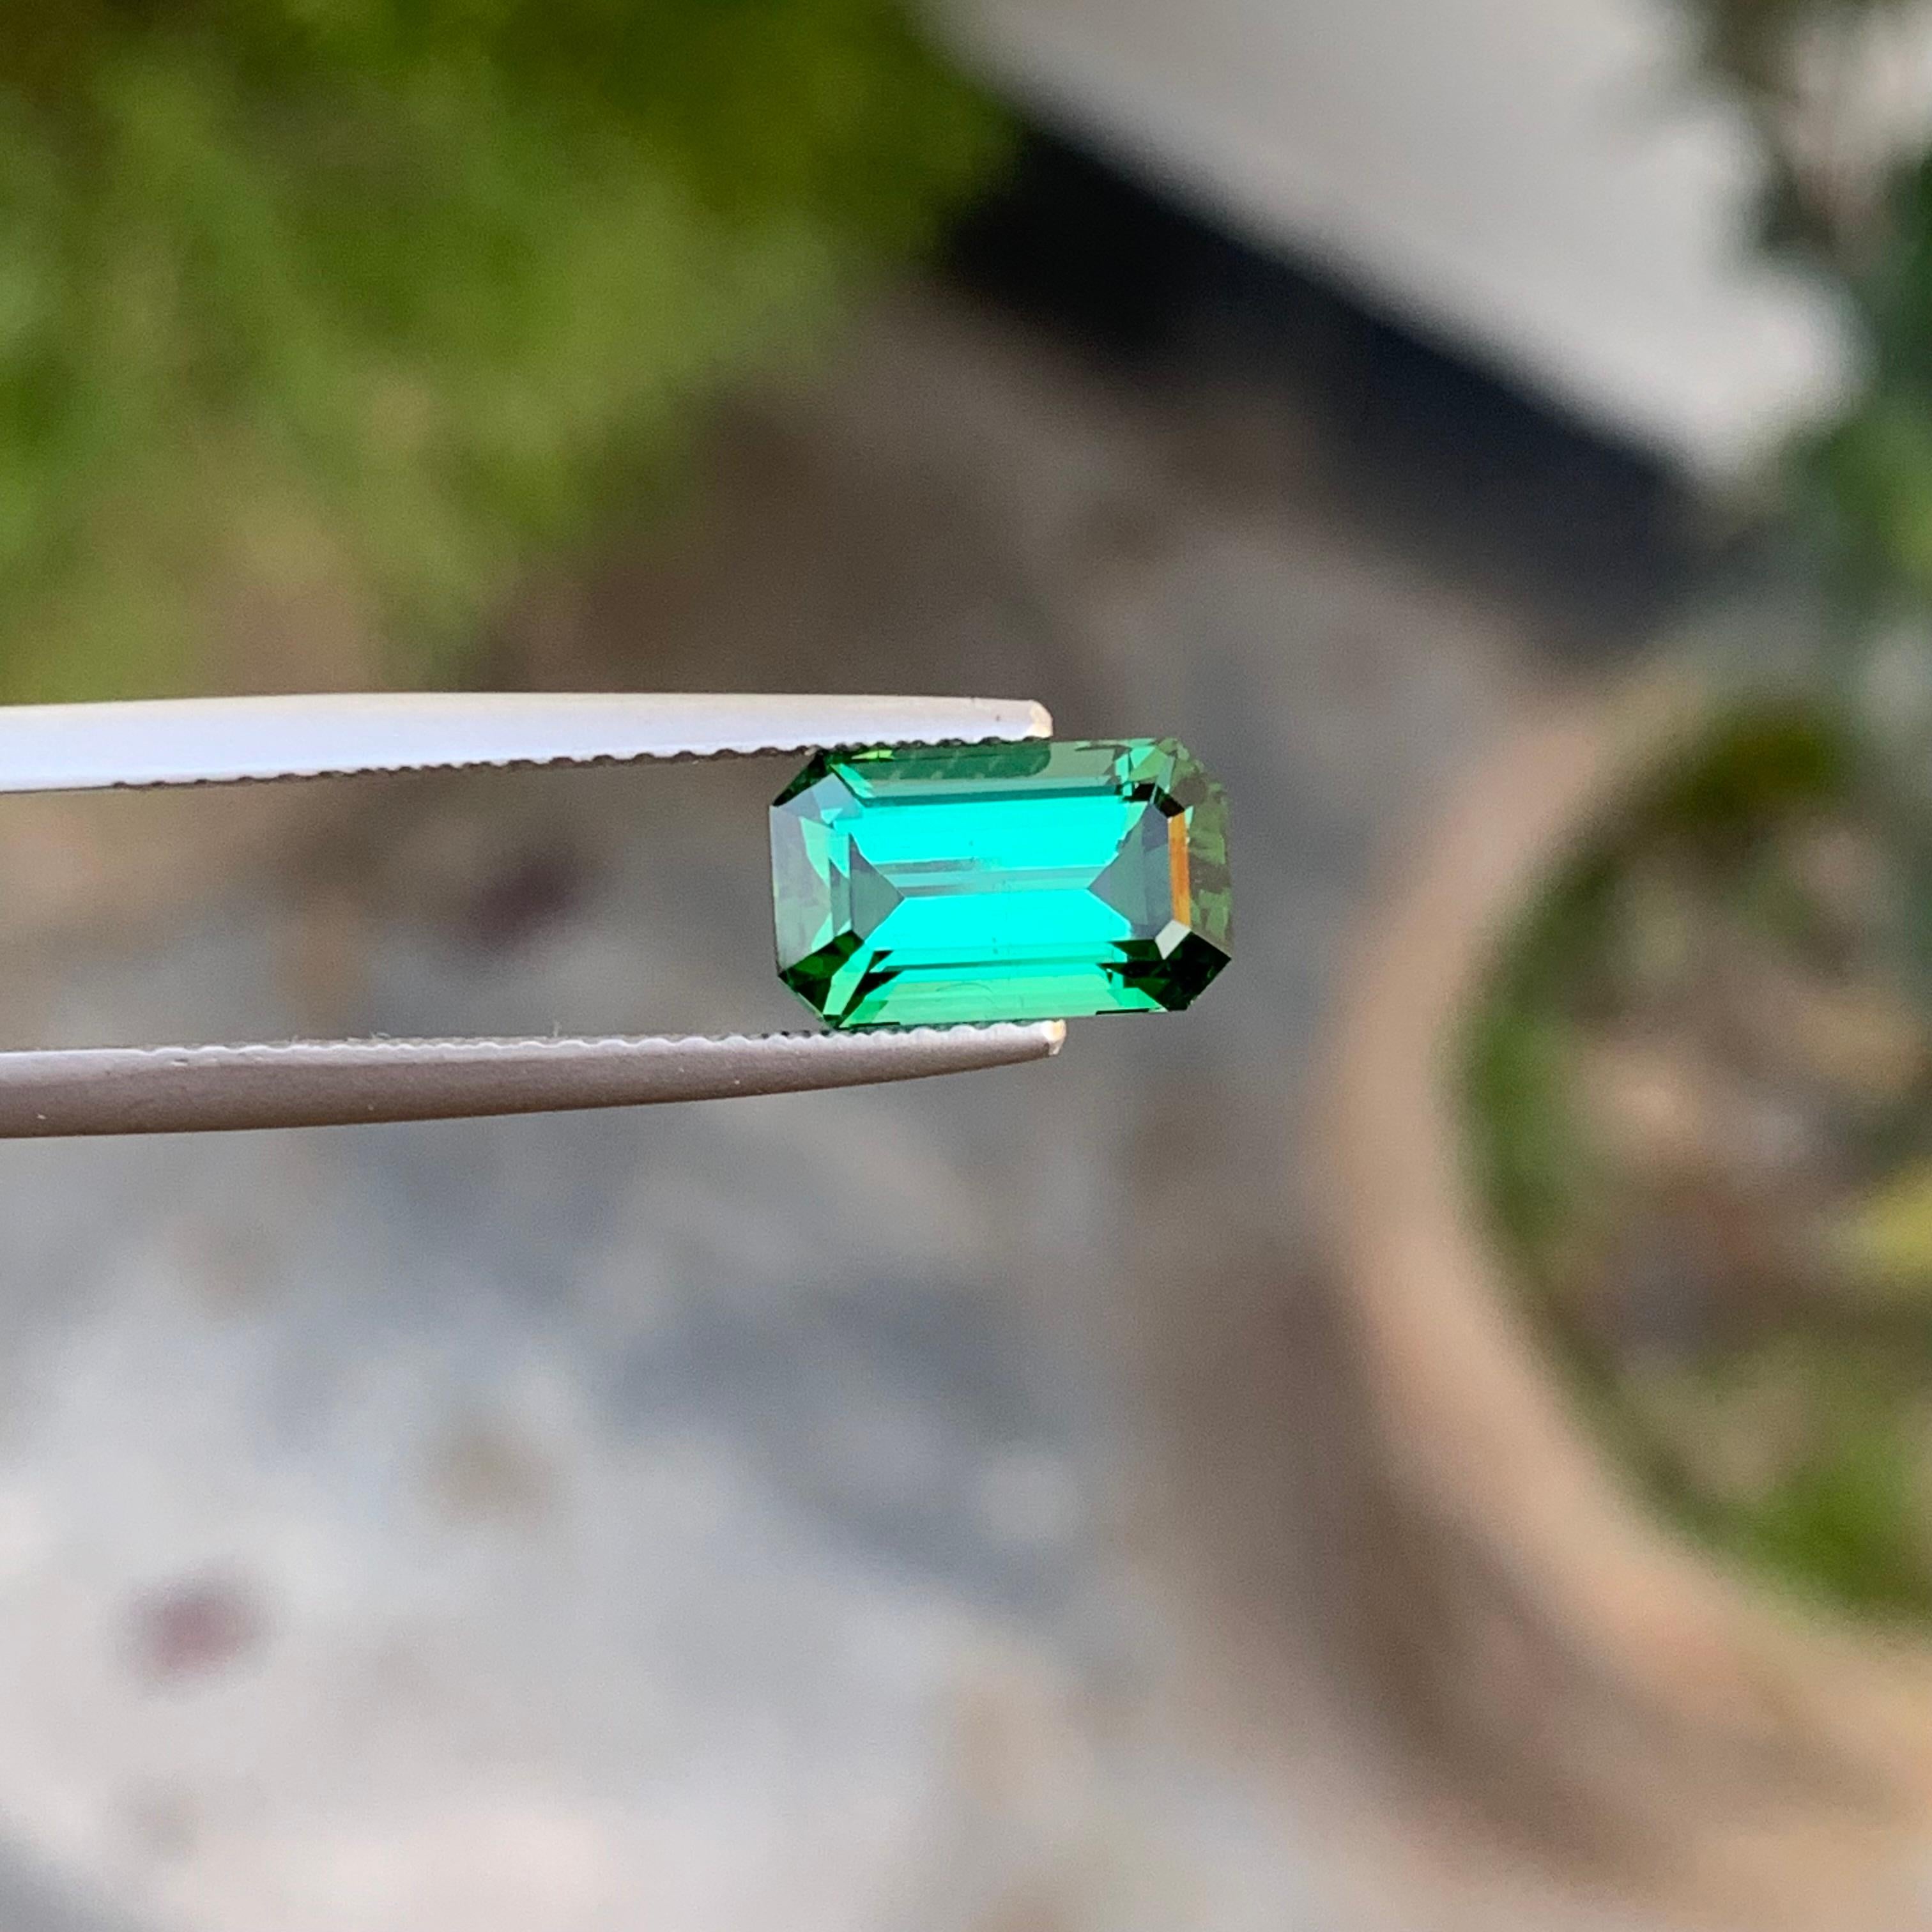 Gemstone Type : Tourmaline
Weight : 2.60 Carats
Dimensions : 9.7x5.8x5.3mm
Origin : Afghanistan
Clarity : Eye Clean
Shape: Emerald Cut
.
Lagoon Tourmaline, like the Paraiba is a member of the large and colorful Tourmaline family. Tourmalines may be